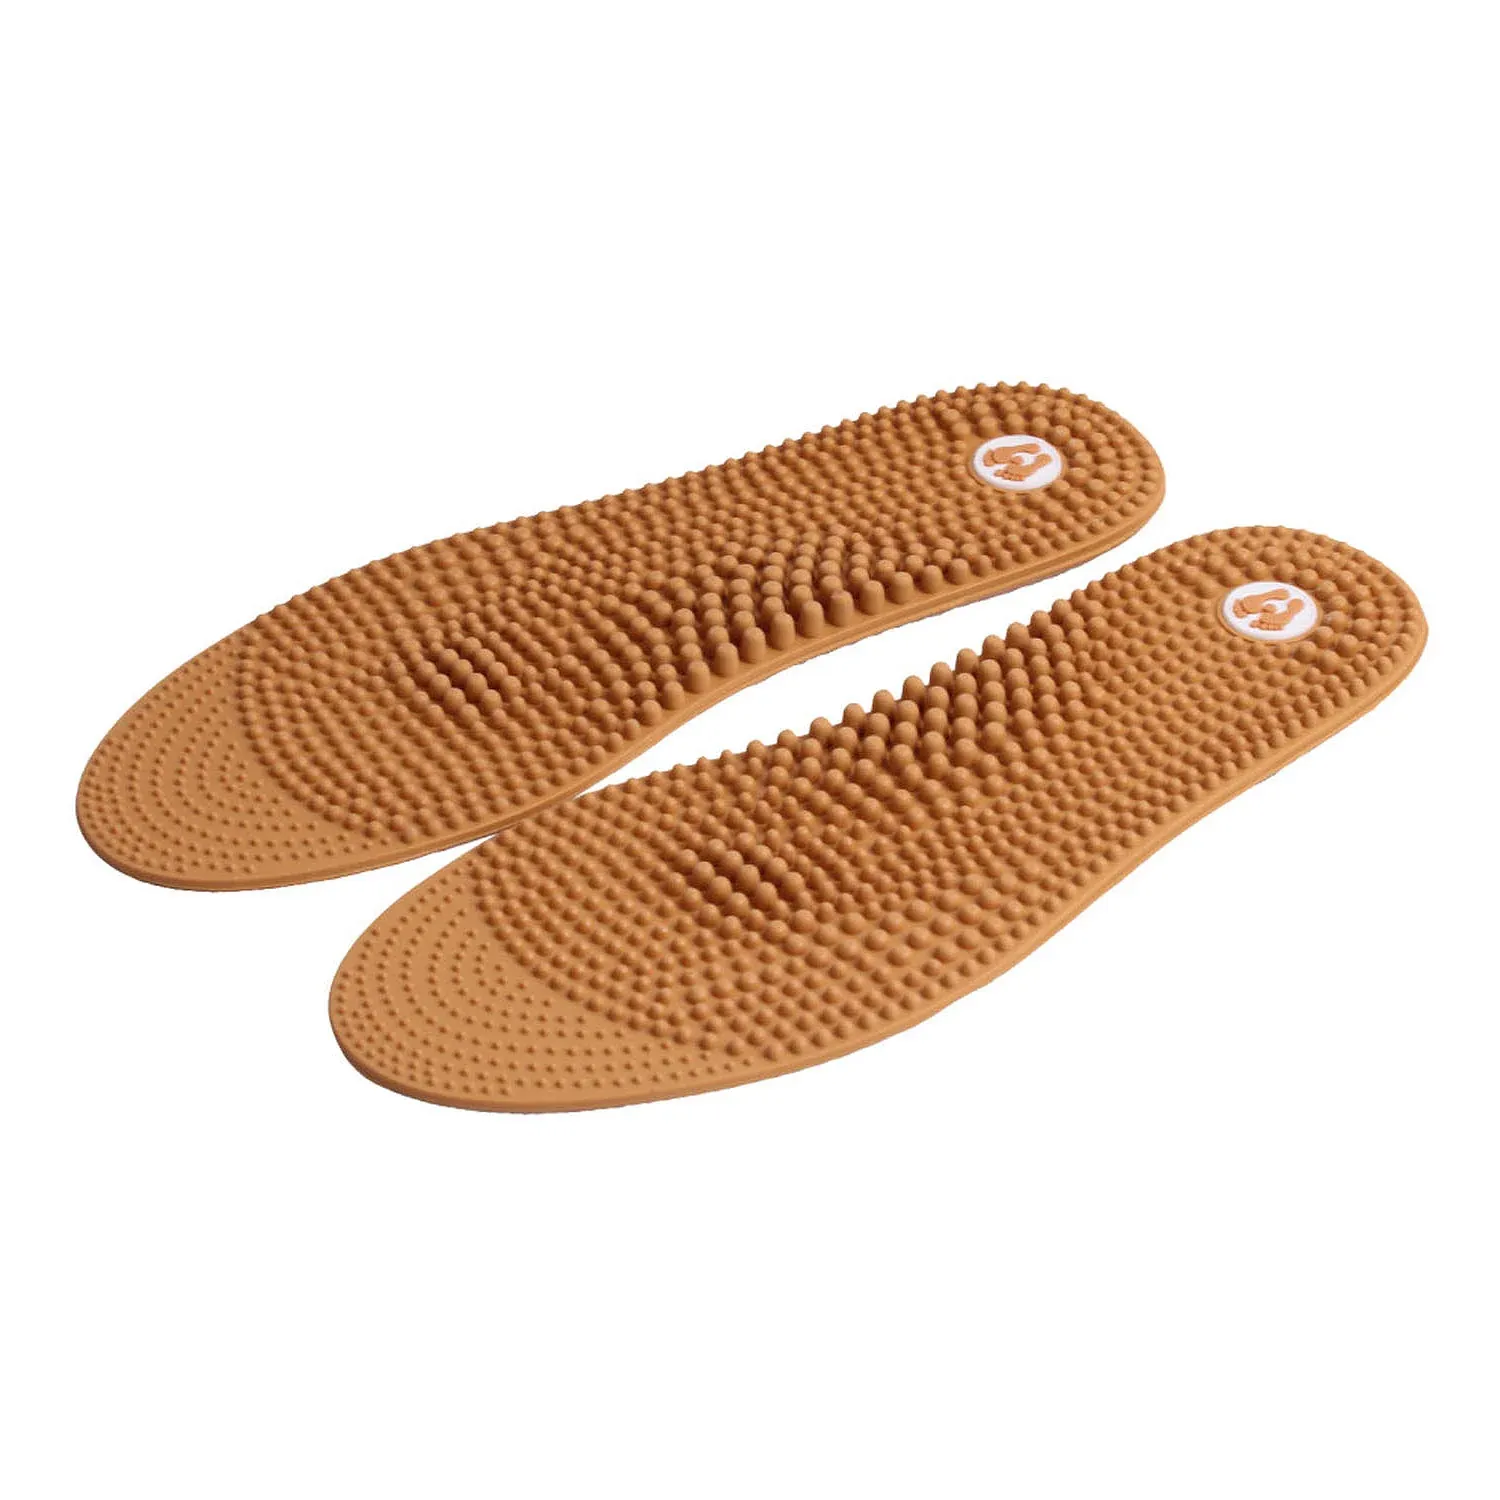 a pair of foot pads with a rubber sole